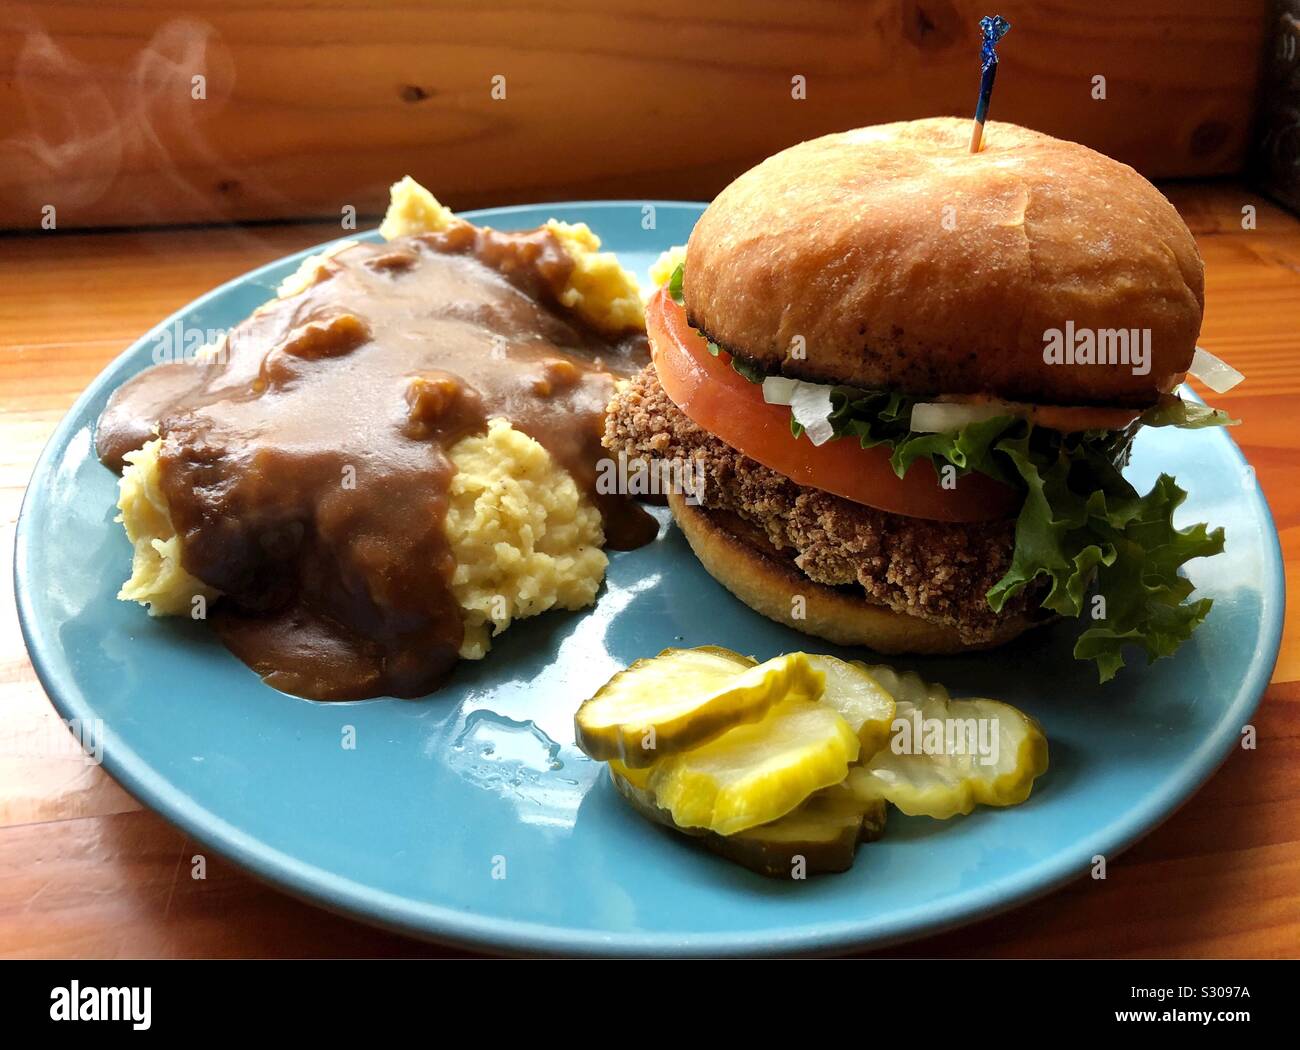 A vegan meal of tofu “chicken” sandwich with mashed potatoes and gravy. Stock Photo